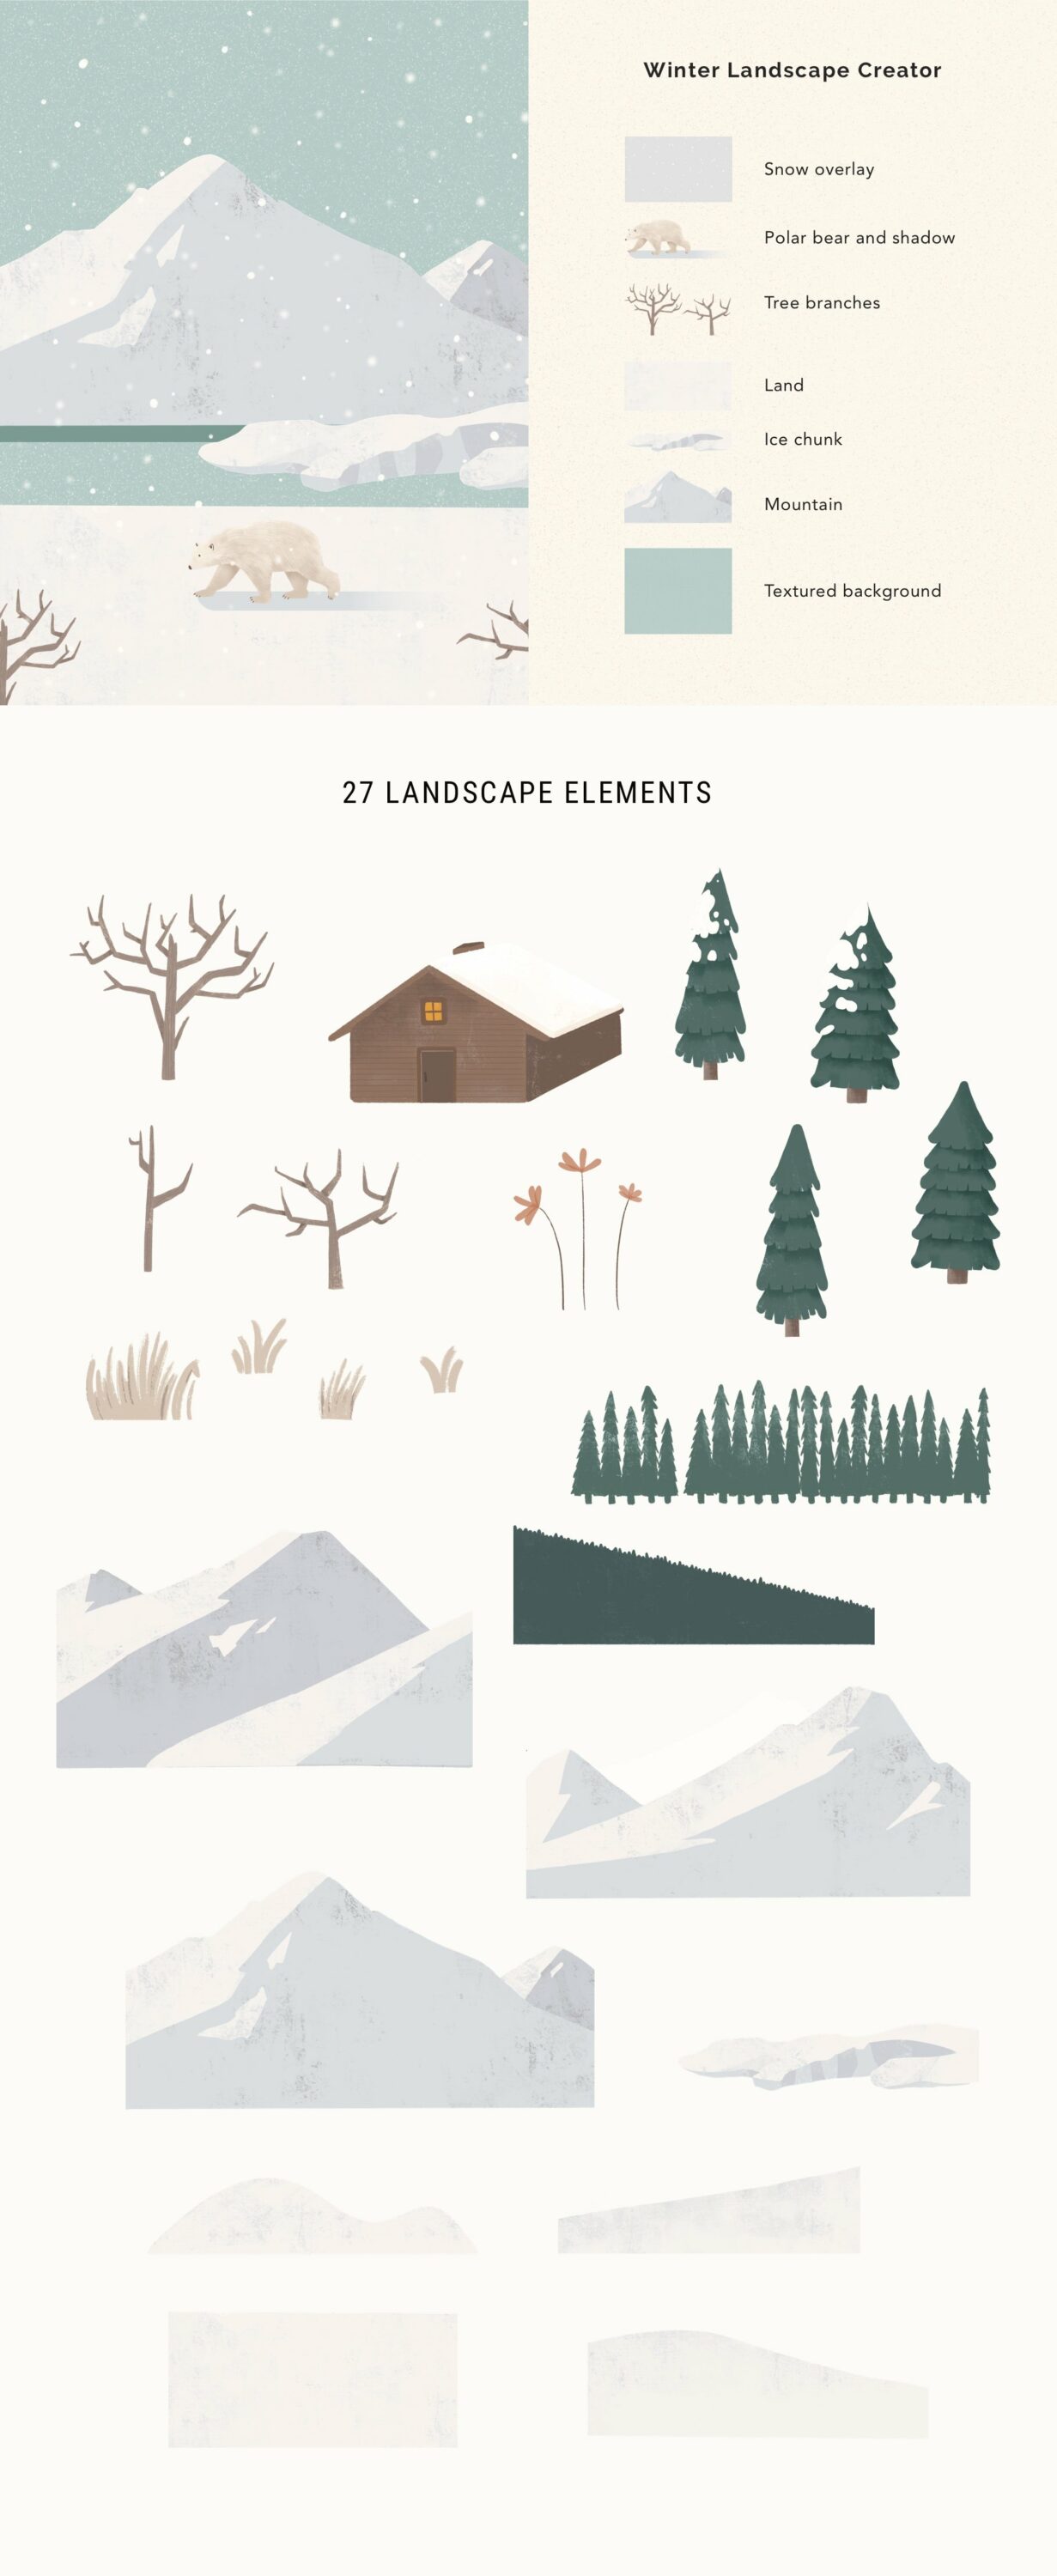 Some elements of forrest.